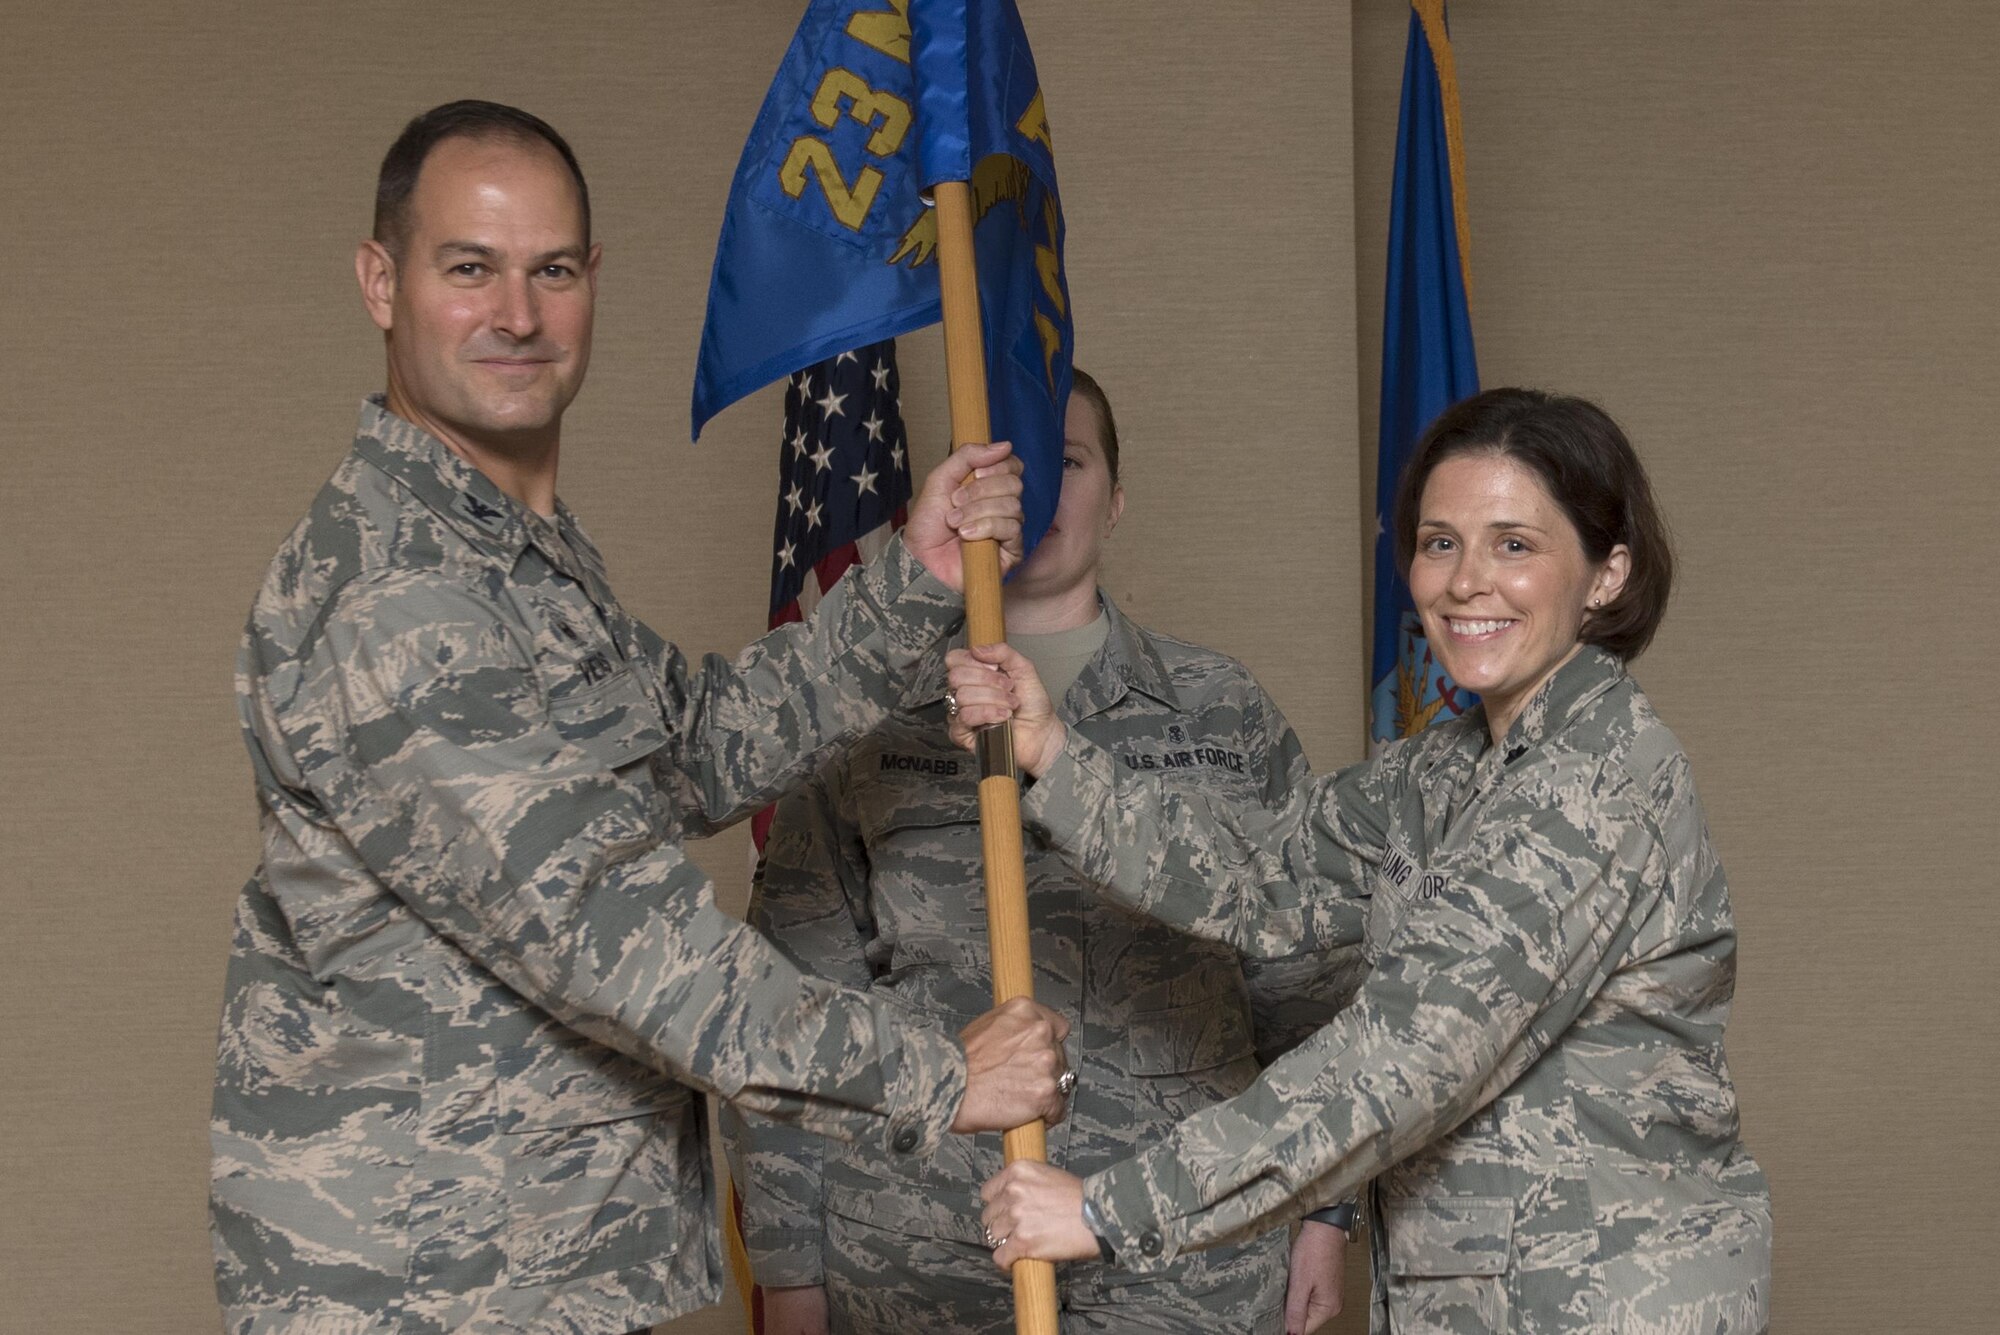 Col. Jay Vietas, left, 23d Medical Group commander, passes the guidon to Lt Col. Tracy K. Bozung, incoming 23d Aerospace Medicine Squadron commander, during a change of command ceremony, July 20, 2017, at Moody Air Force Base, Ga. The 23d AMDS oversees the individual medical readiness of approximately 4,000 active-duty members and the occupational health of roughly 5,500 industrial workers. (U.S. Air Force photo by Airman 1st Class Destiney Masse)